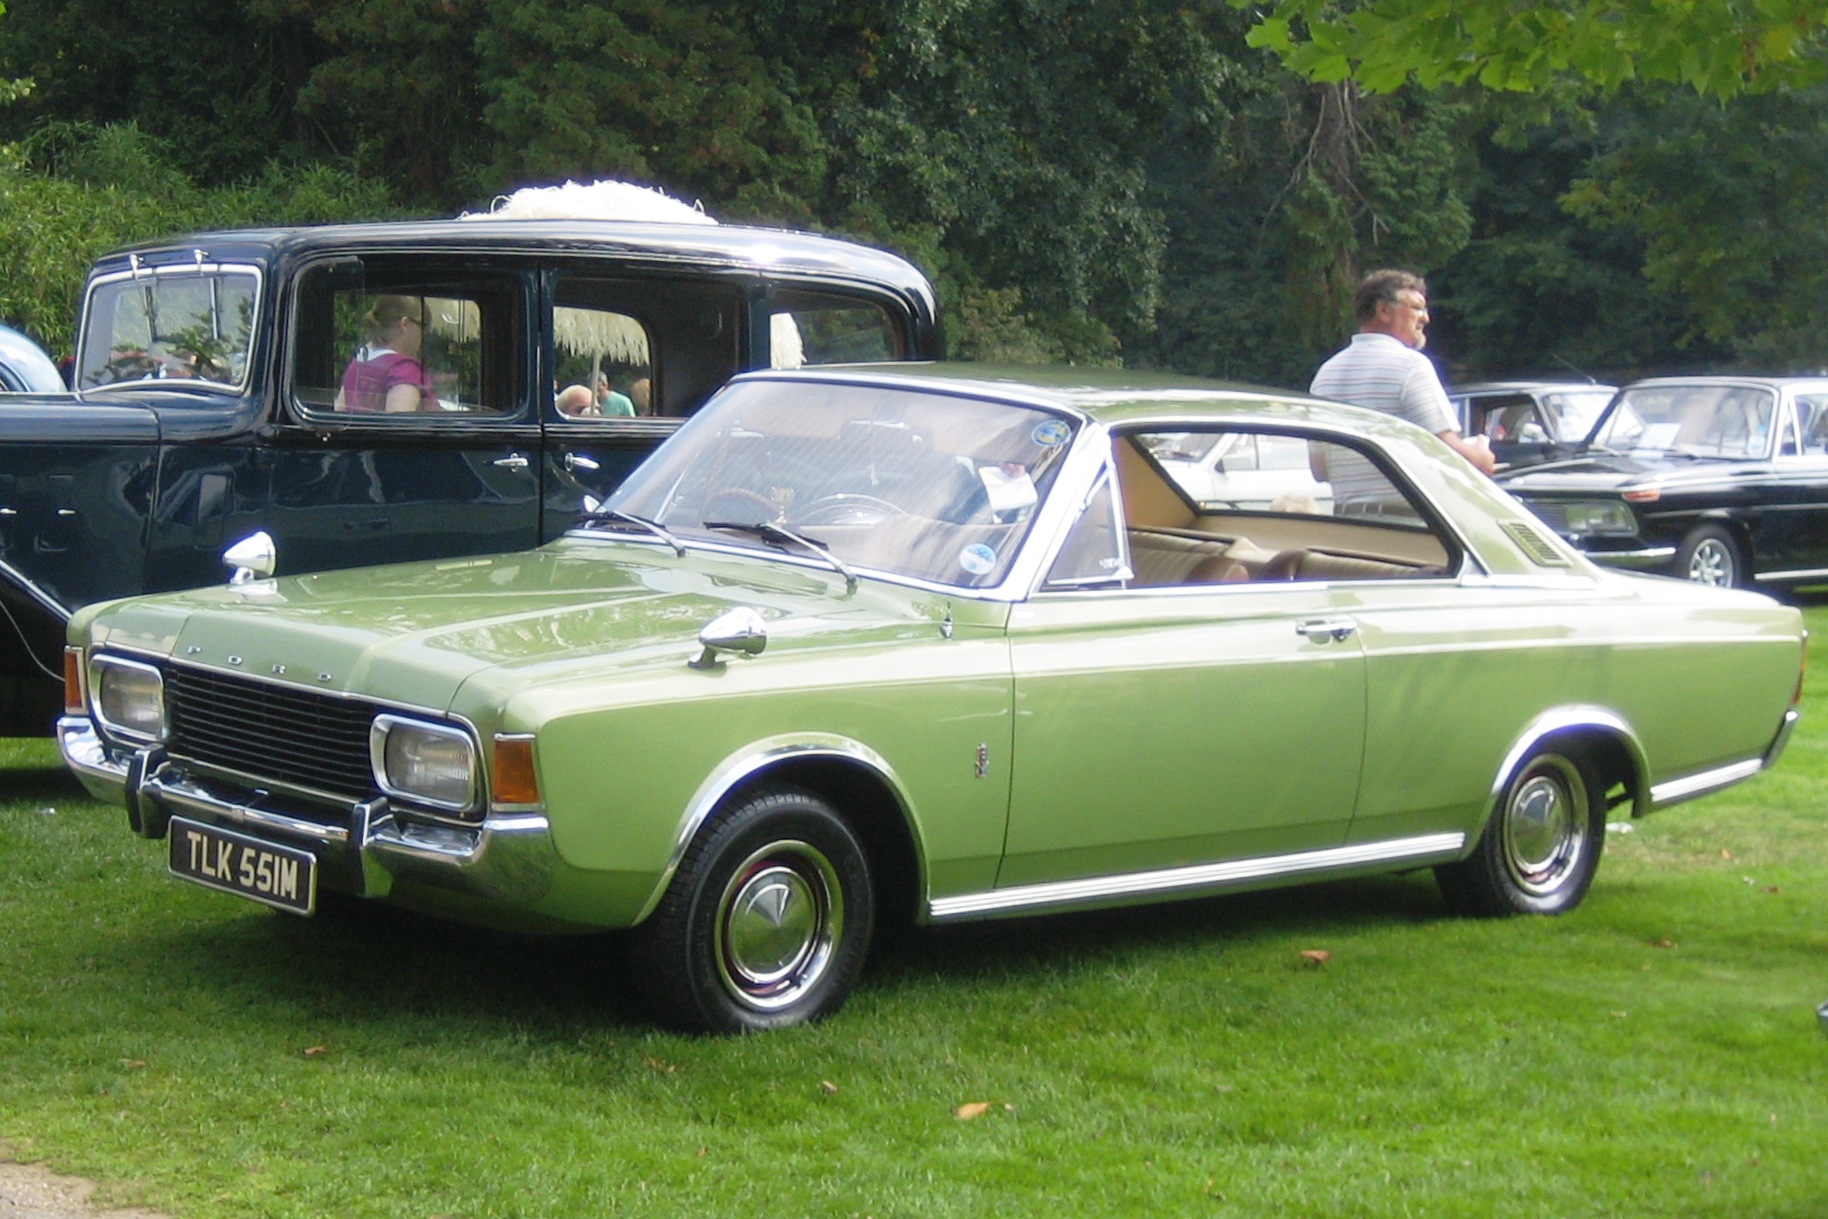 Ford_Taunus_20M_P7_Coupe_locense_plate_ca_1972_so_one_of_the_last_ones_photo_2008.JPG